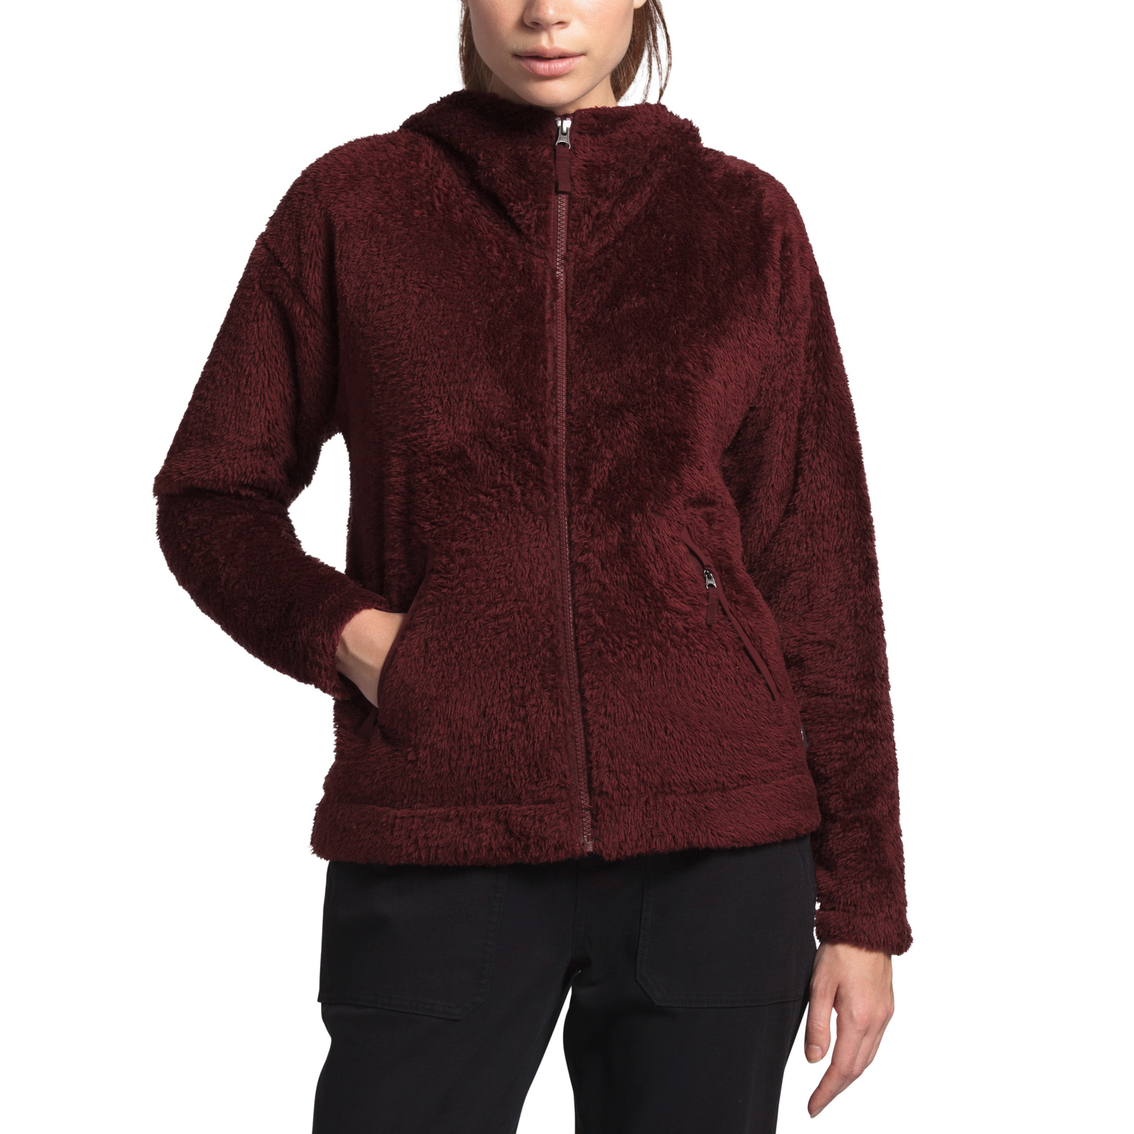 The North Face Furry Fleece Fz Hoodie | Jackets | Clothing